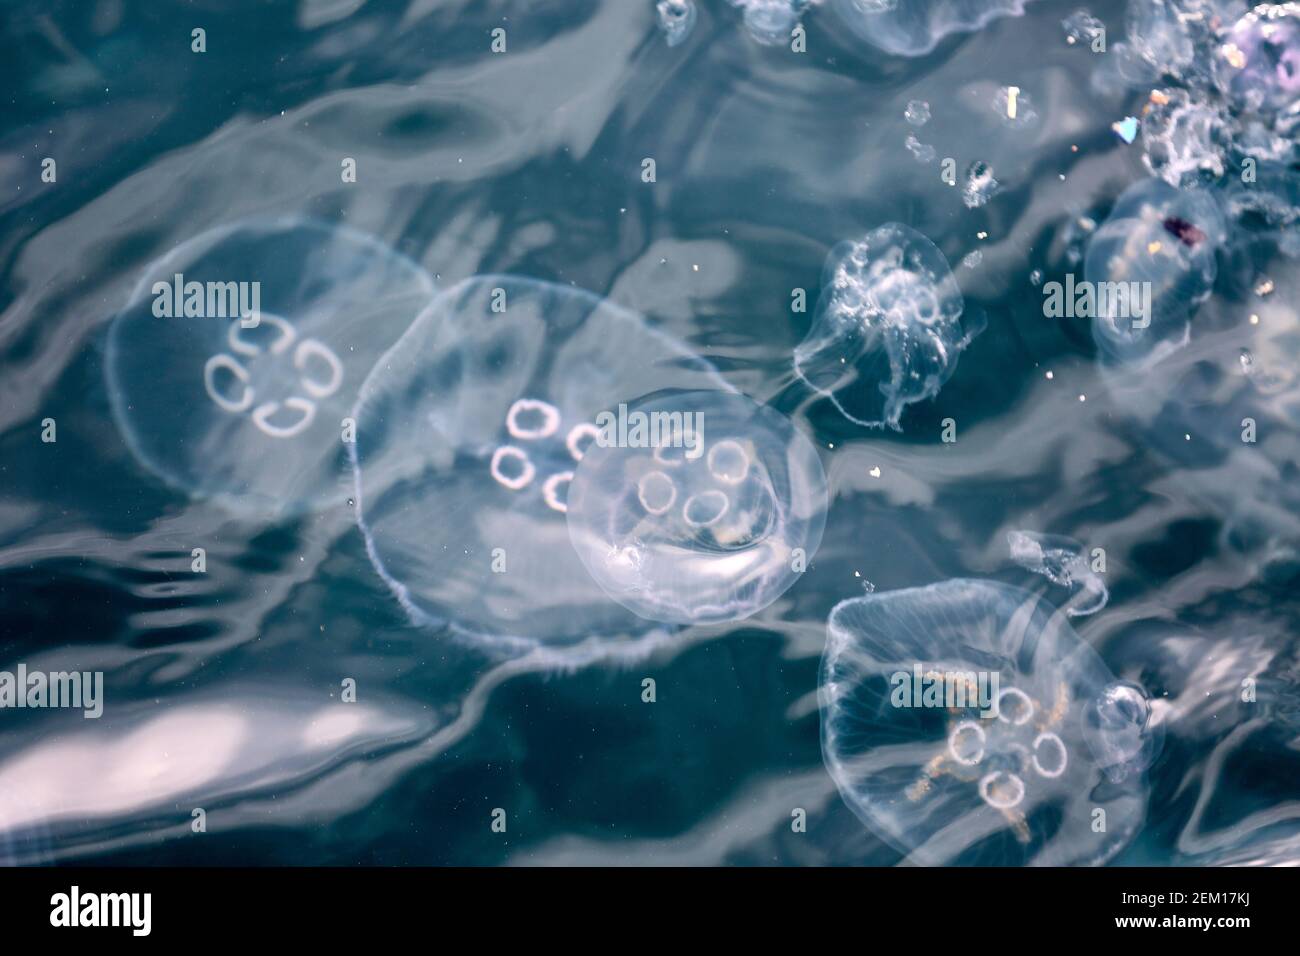 Jellyfishs and sea pollution - stock photo Stock Photo